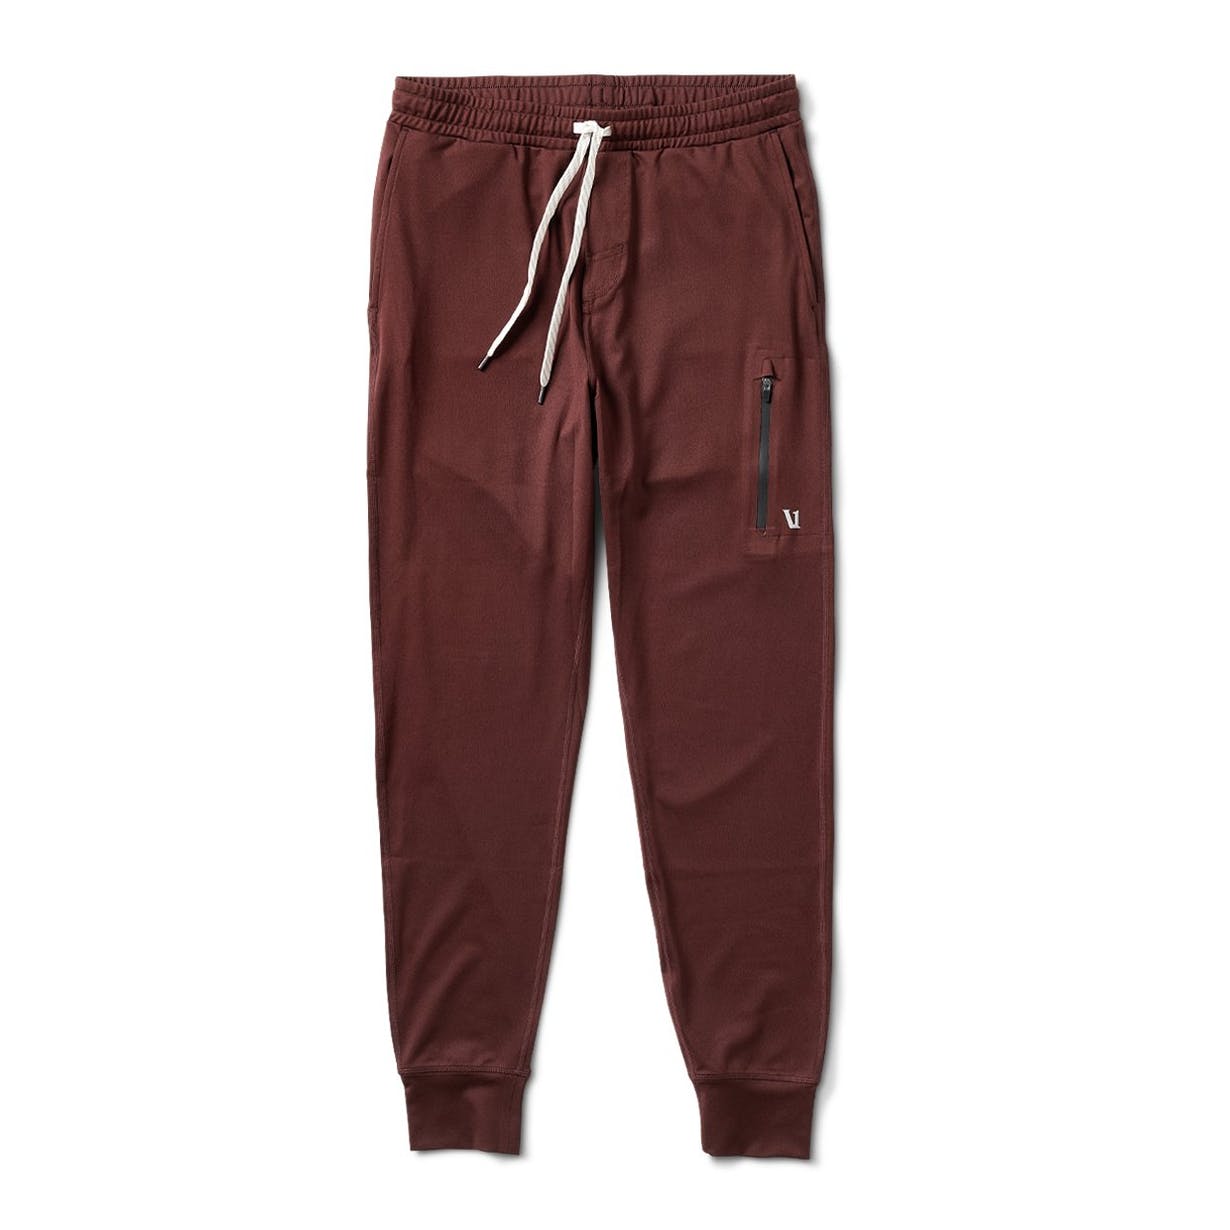 homines jogger 9